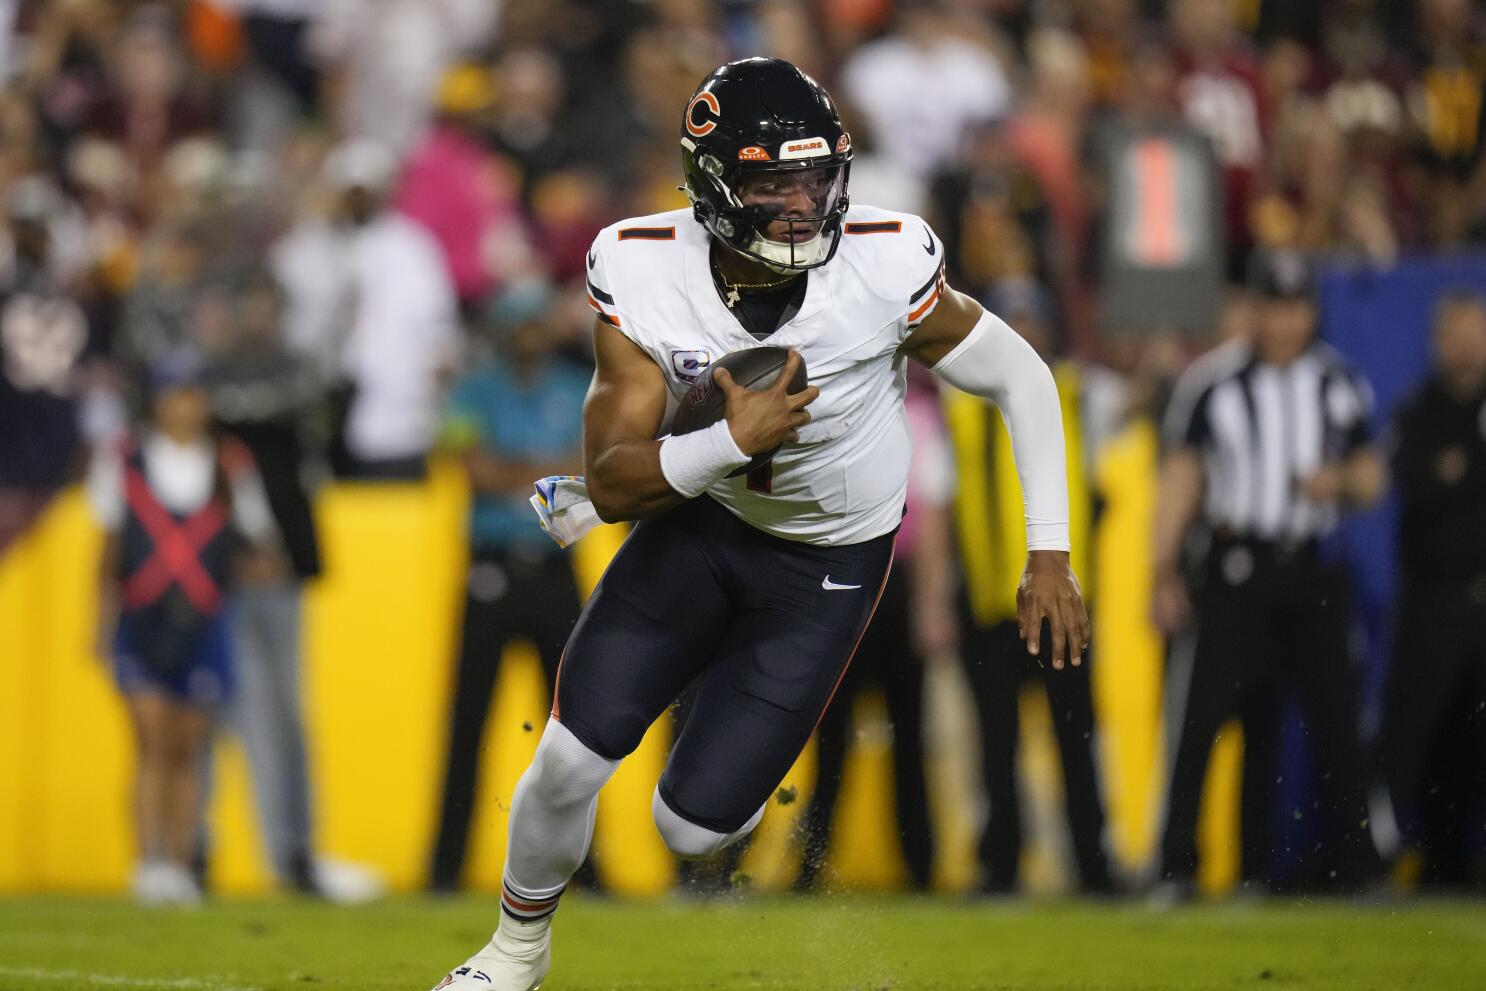 Bears rally to beat Eagles in Monday night football